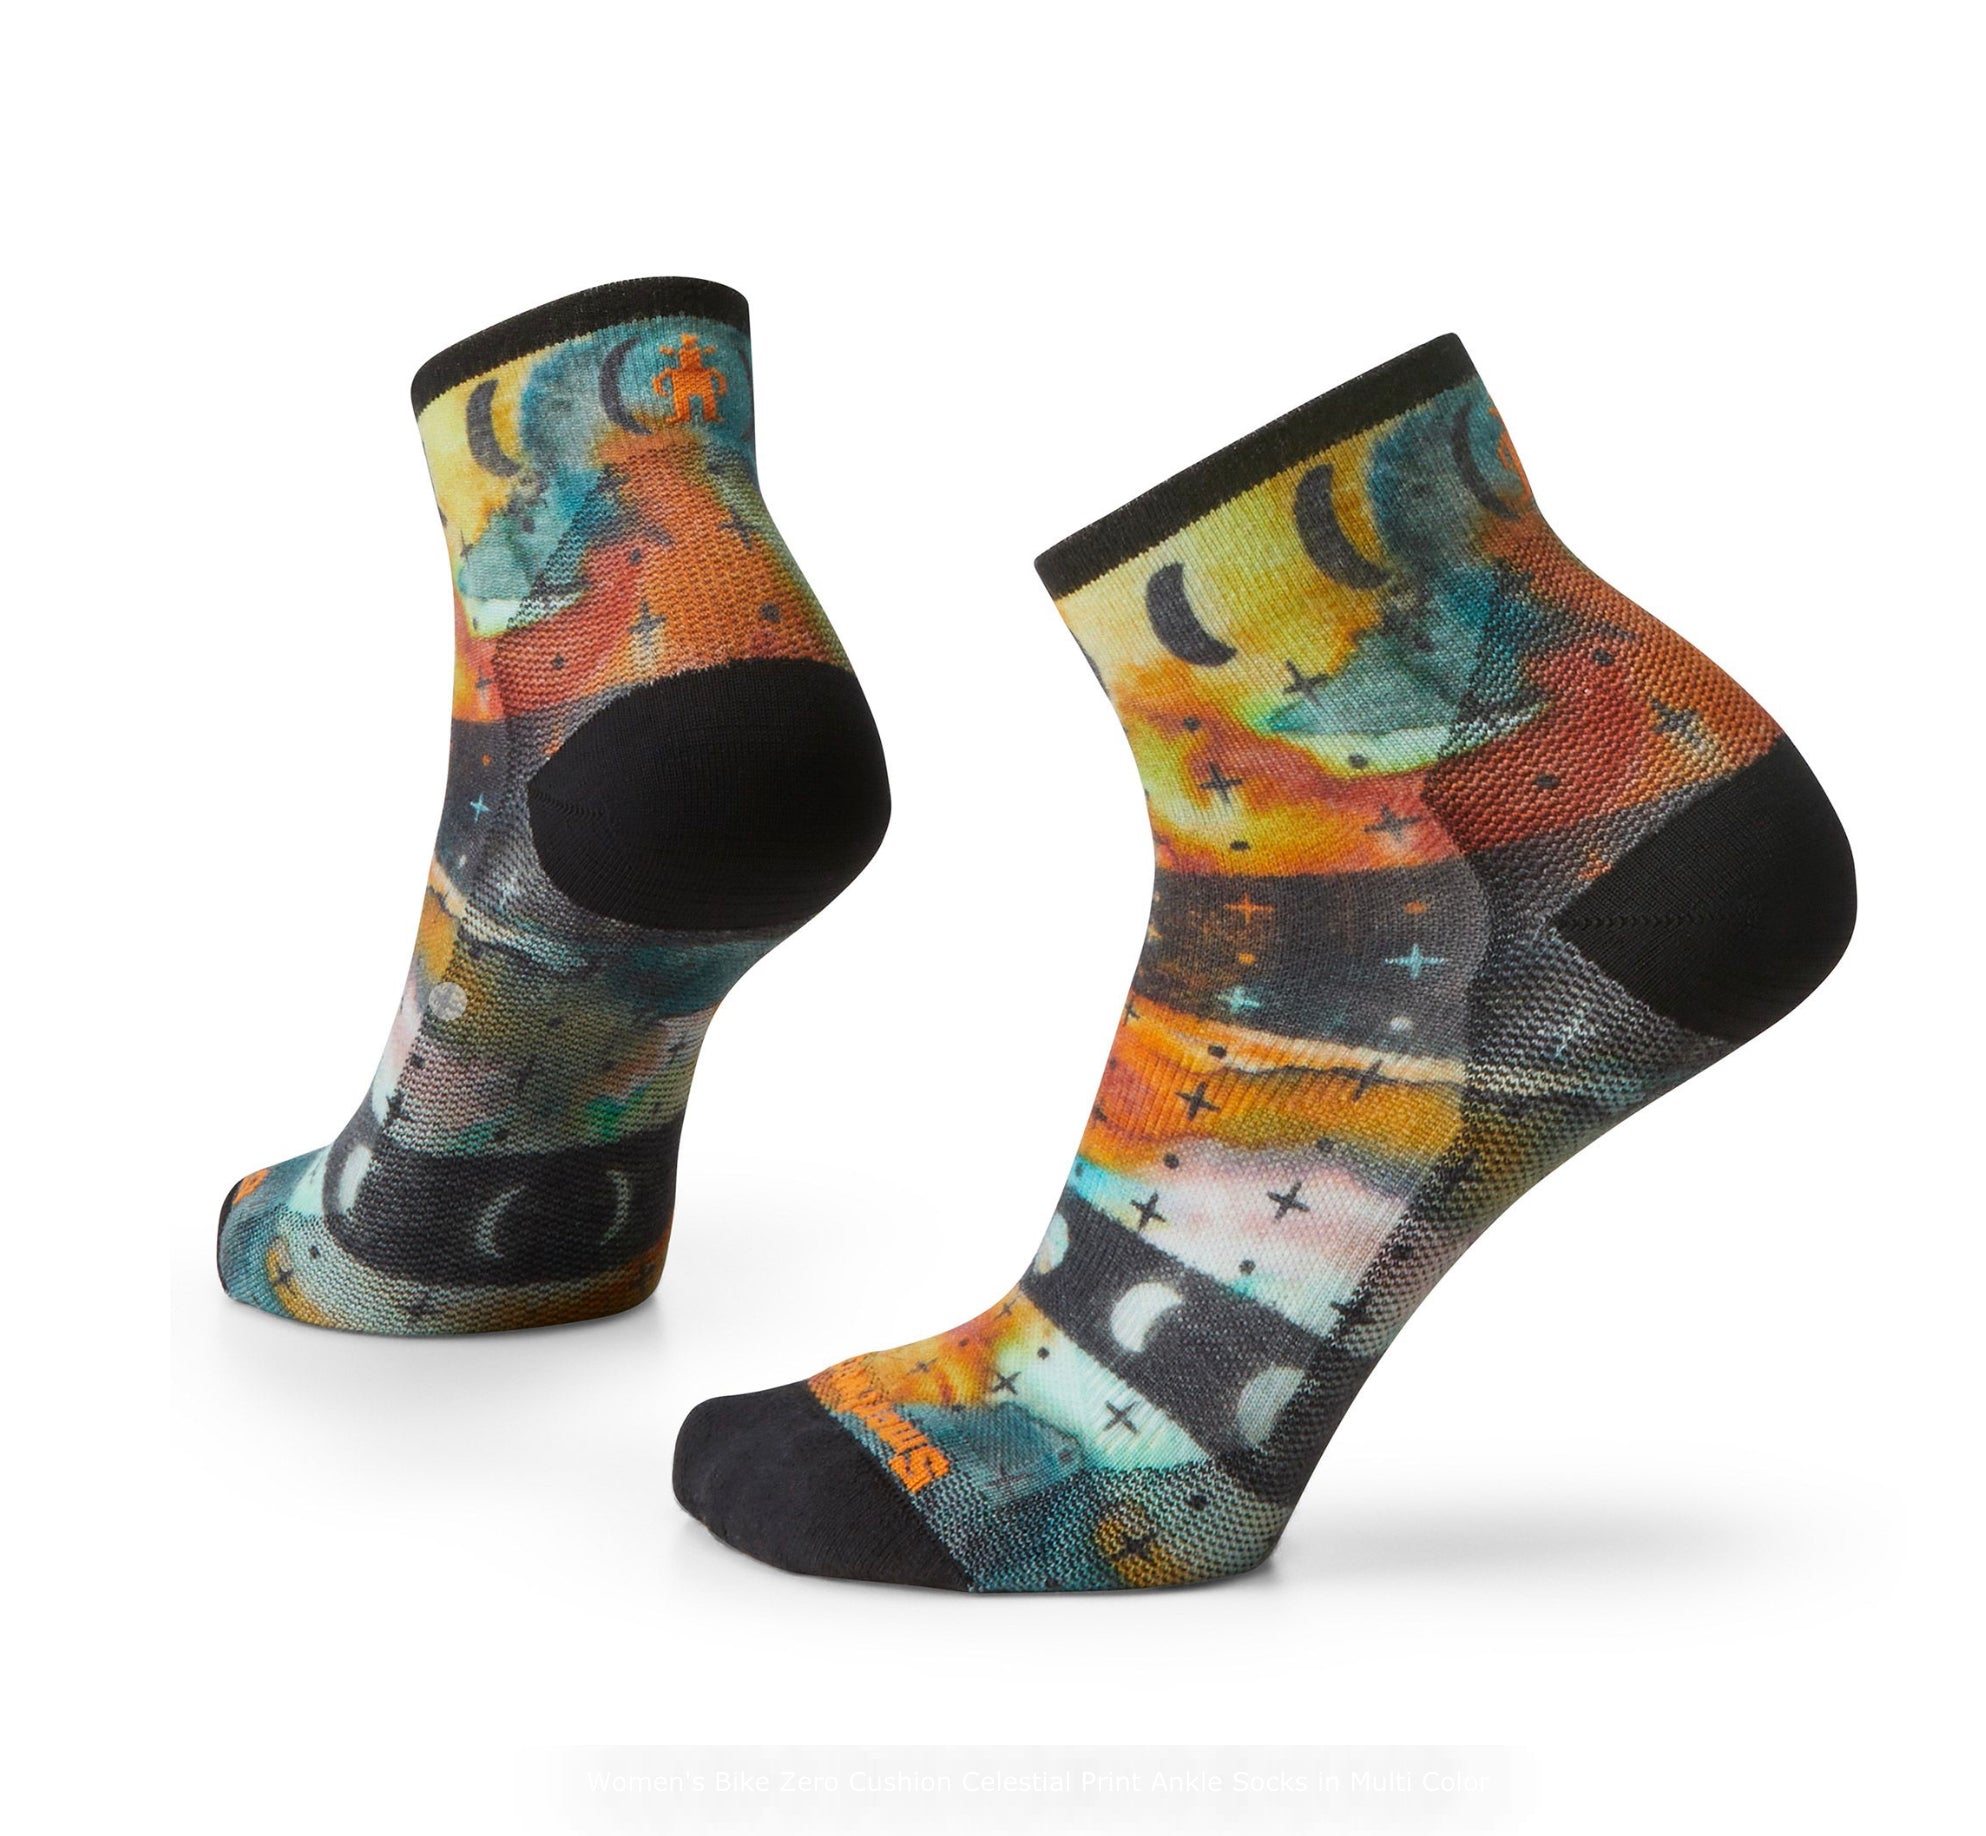 For those cyclists whose heads are always in the heavens, we’ve created the Women’s Bike Zero Cushion Celestial Print Ankle Socks.